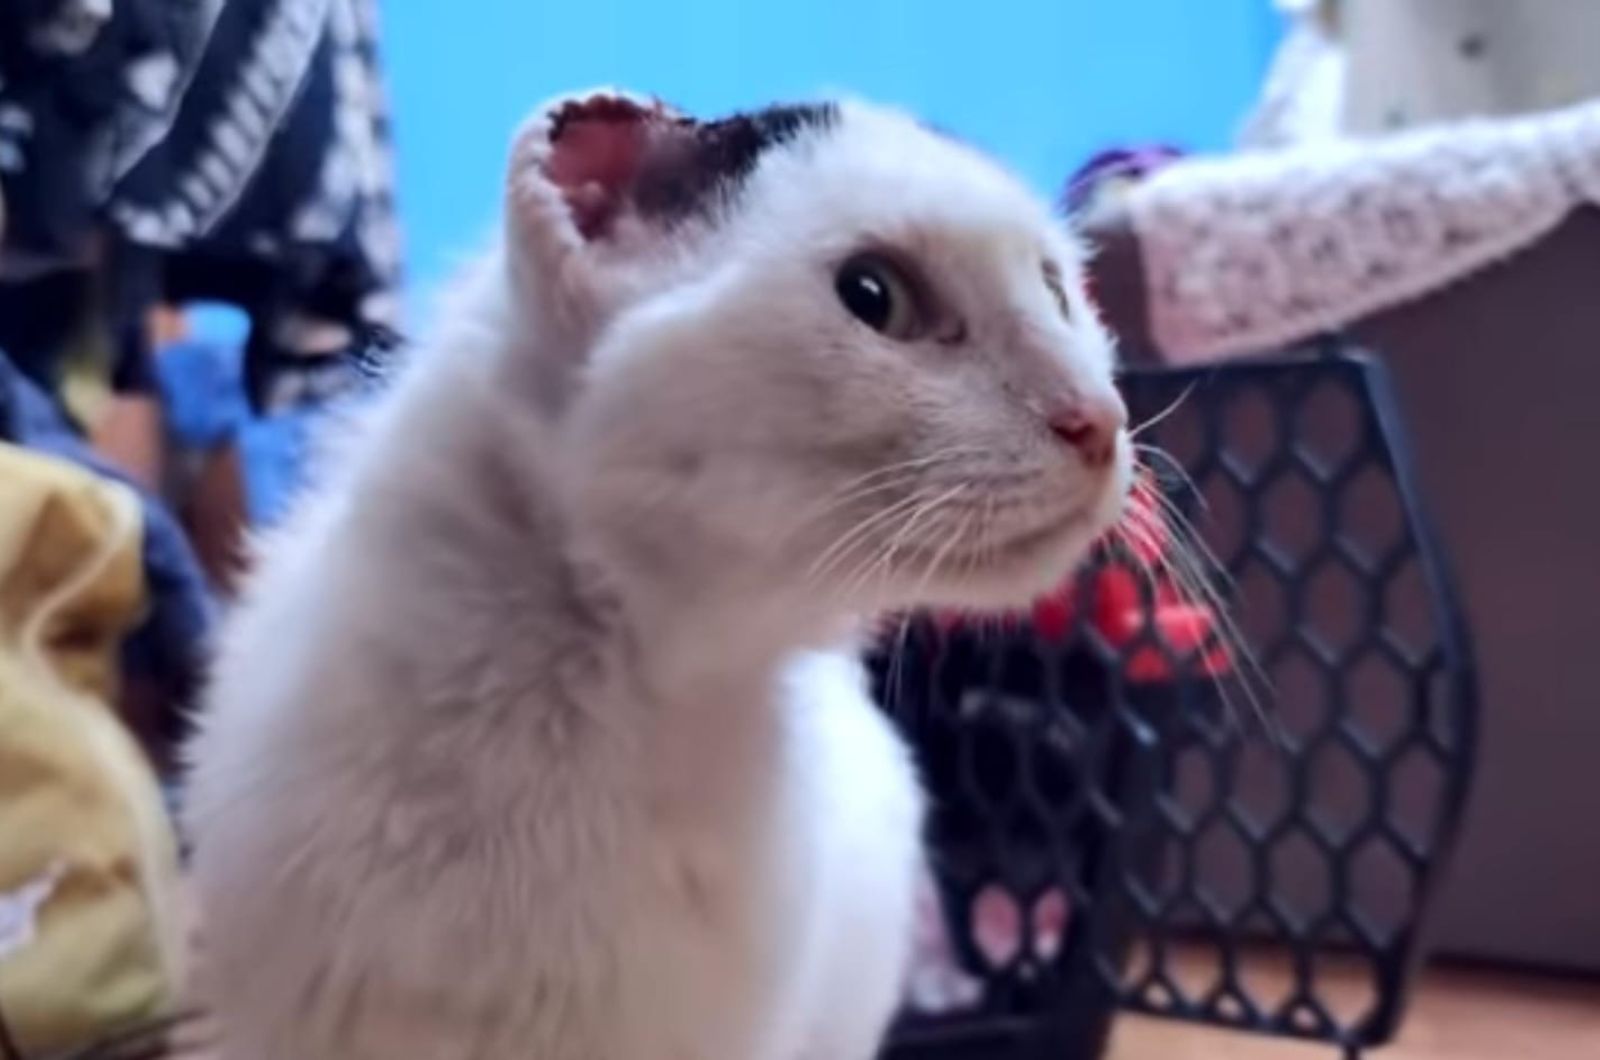 bullied cat with injured ears